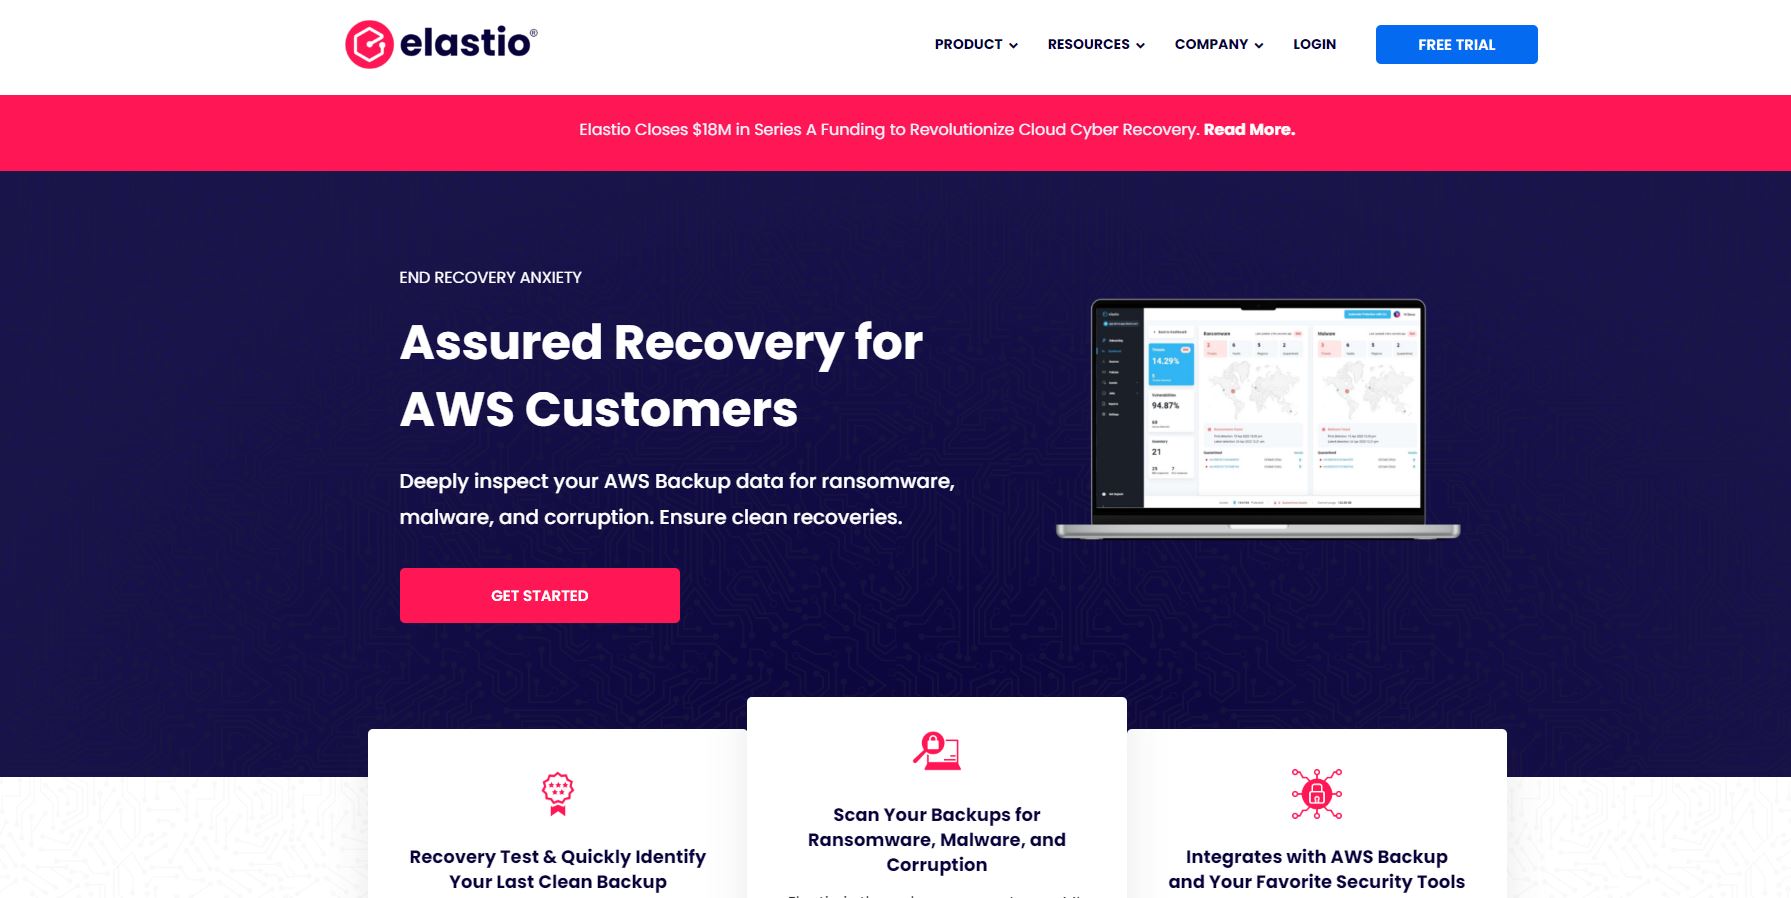 With $18M in funding from prominent investors, Elastio is revolutionizing data security and backup restoration in the software development industry